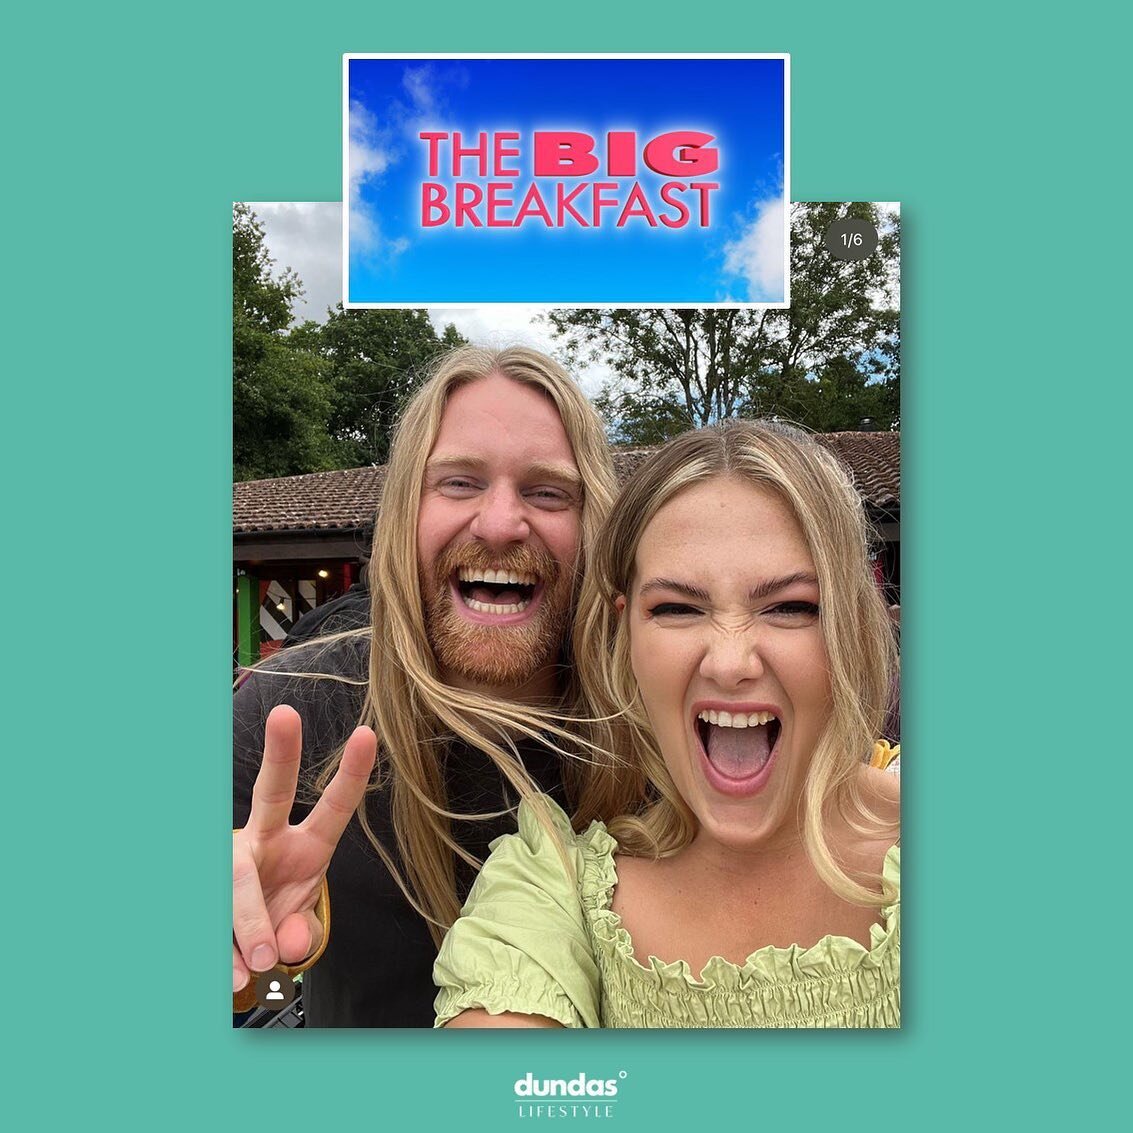 Did you catch @poppy_cooks on The Big Breakfast this Saturday? Here she is with spaceman @samhairwolfryder 🍳